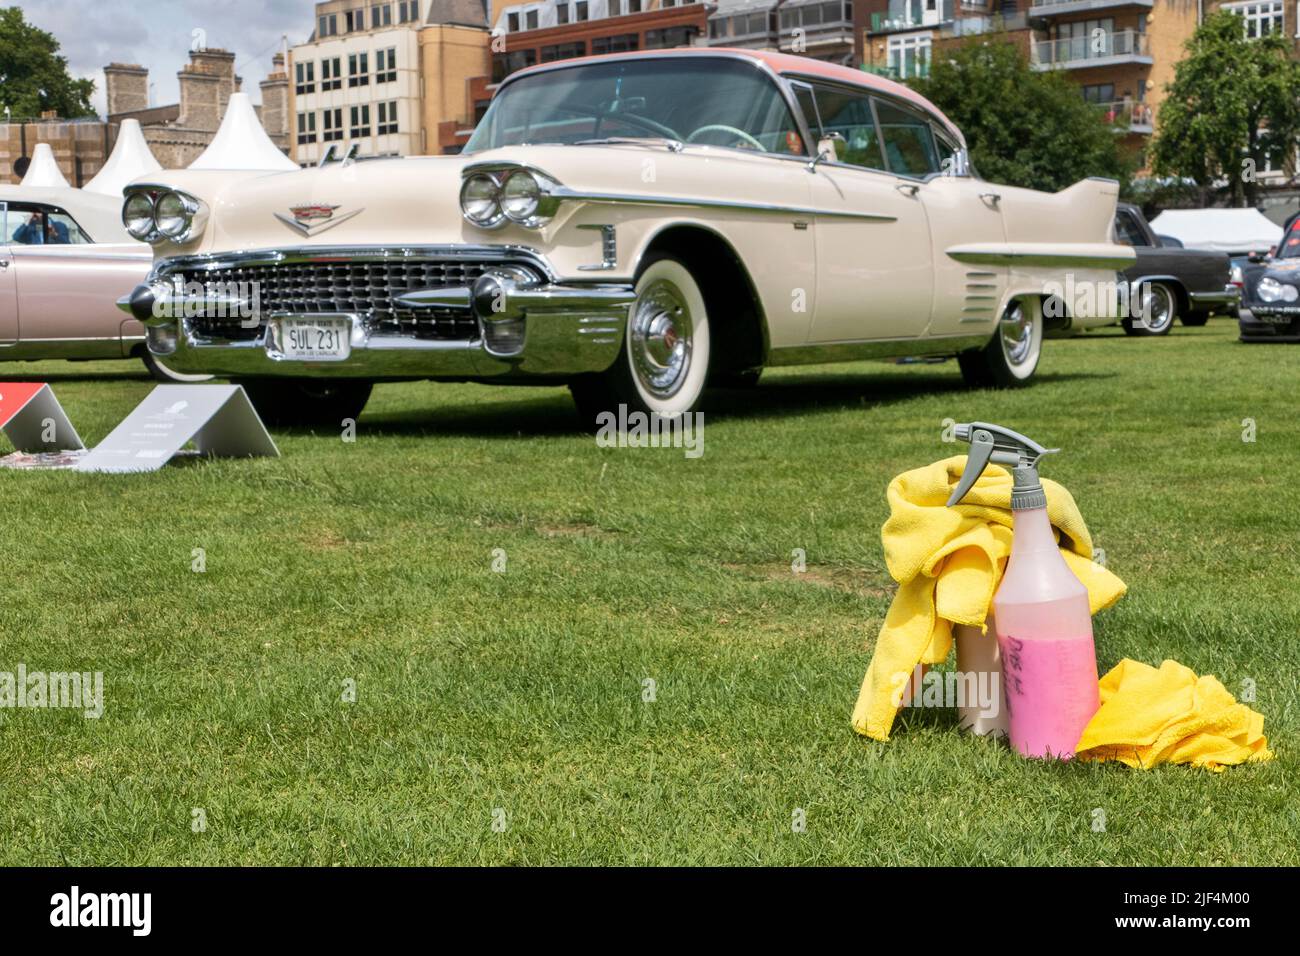 1958 Cadillac Sedan de Ville class winner at the London Concours at the Honourable Artillery Company in the City of London UK Stock Photo